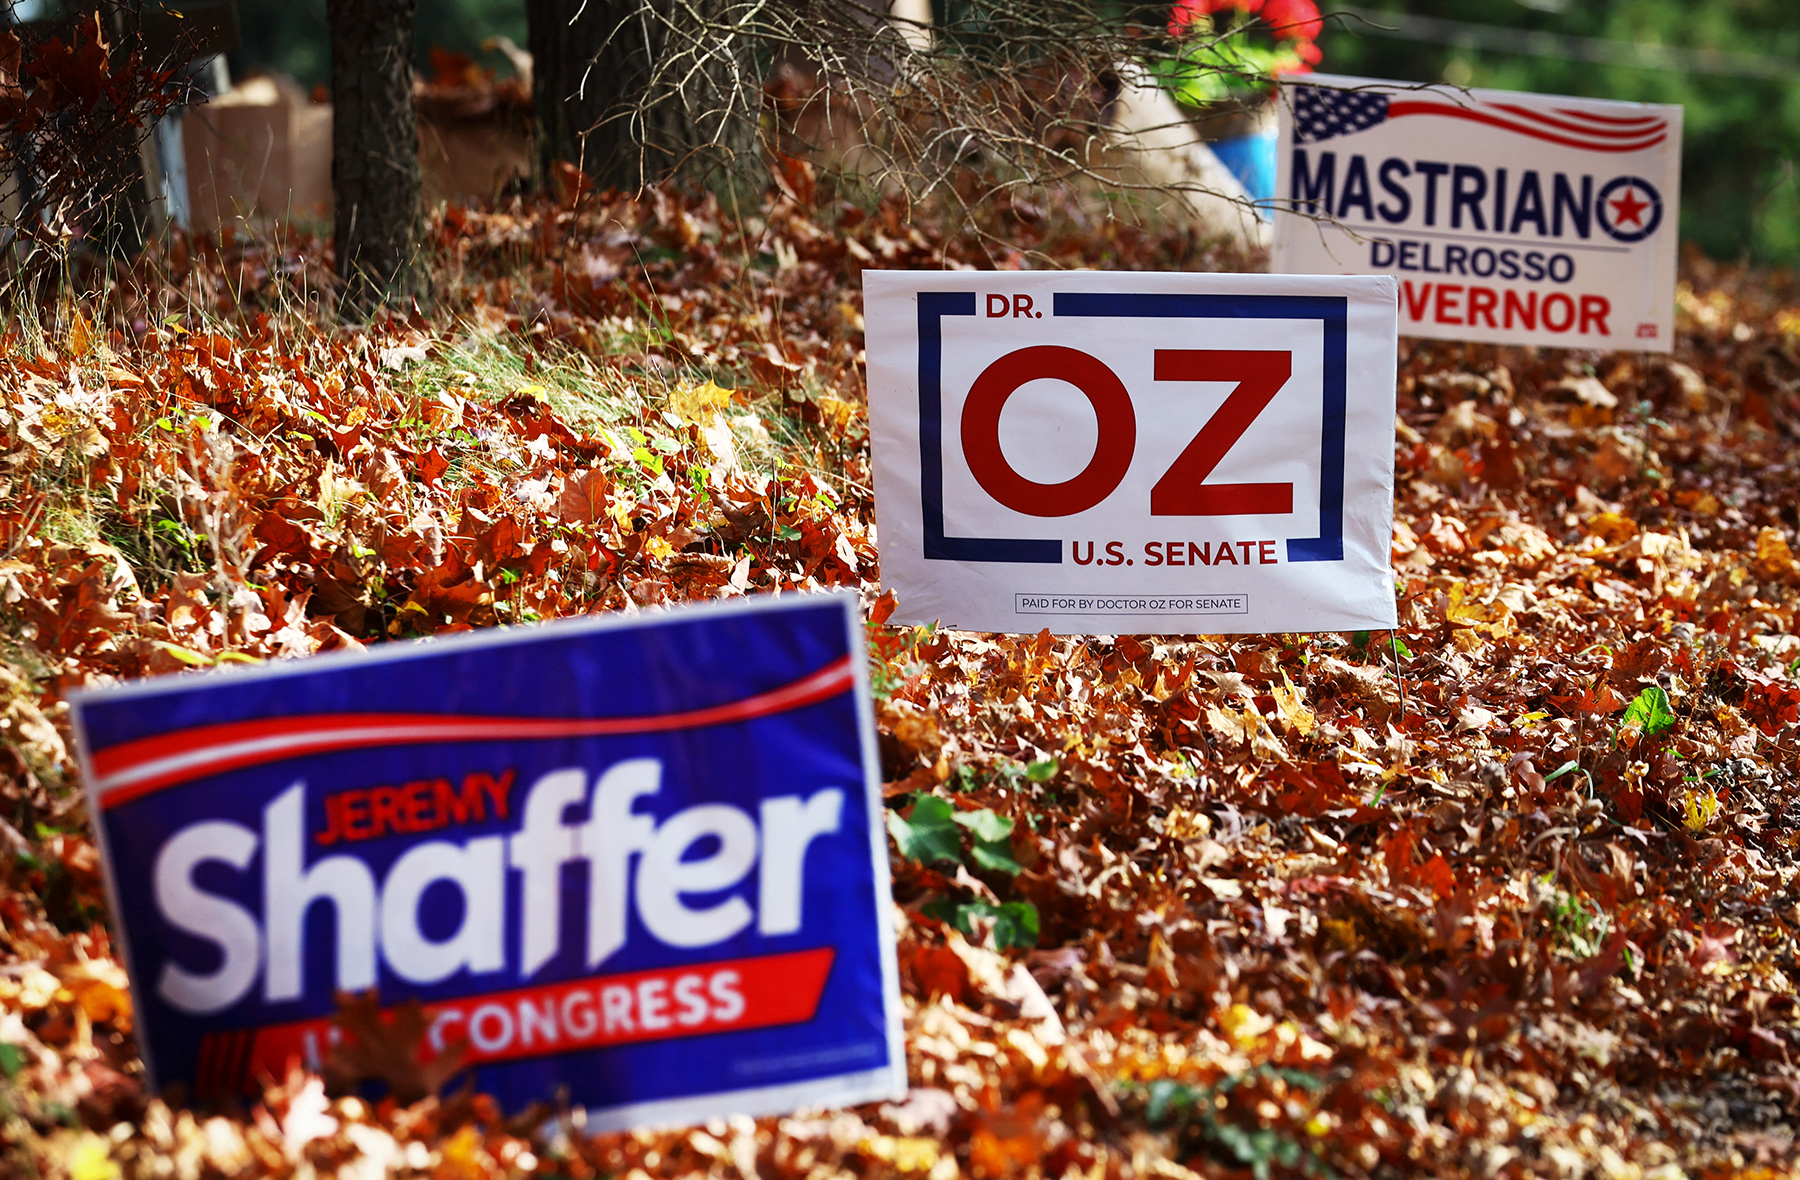 Political signs ahead of November 8, 2022 U.S. midterm elections in Wexford Pennsylvania